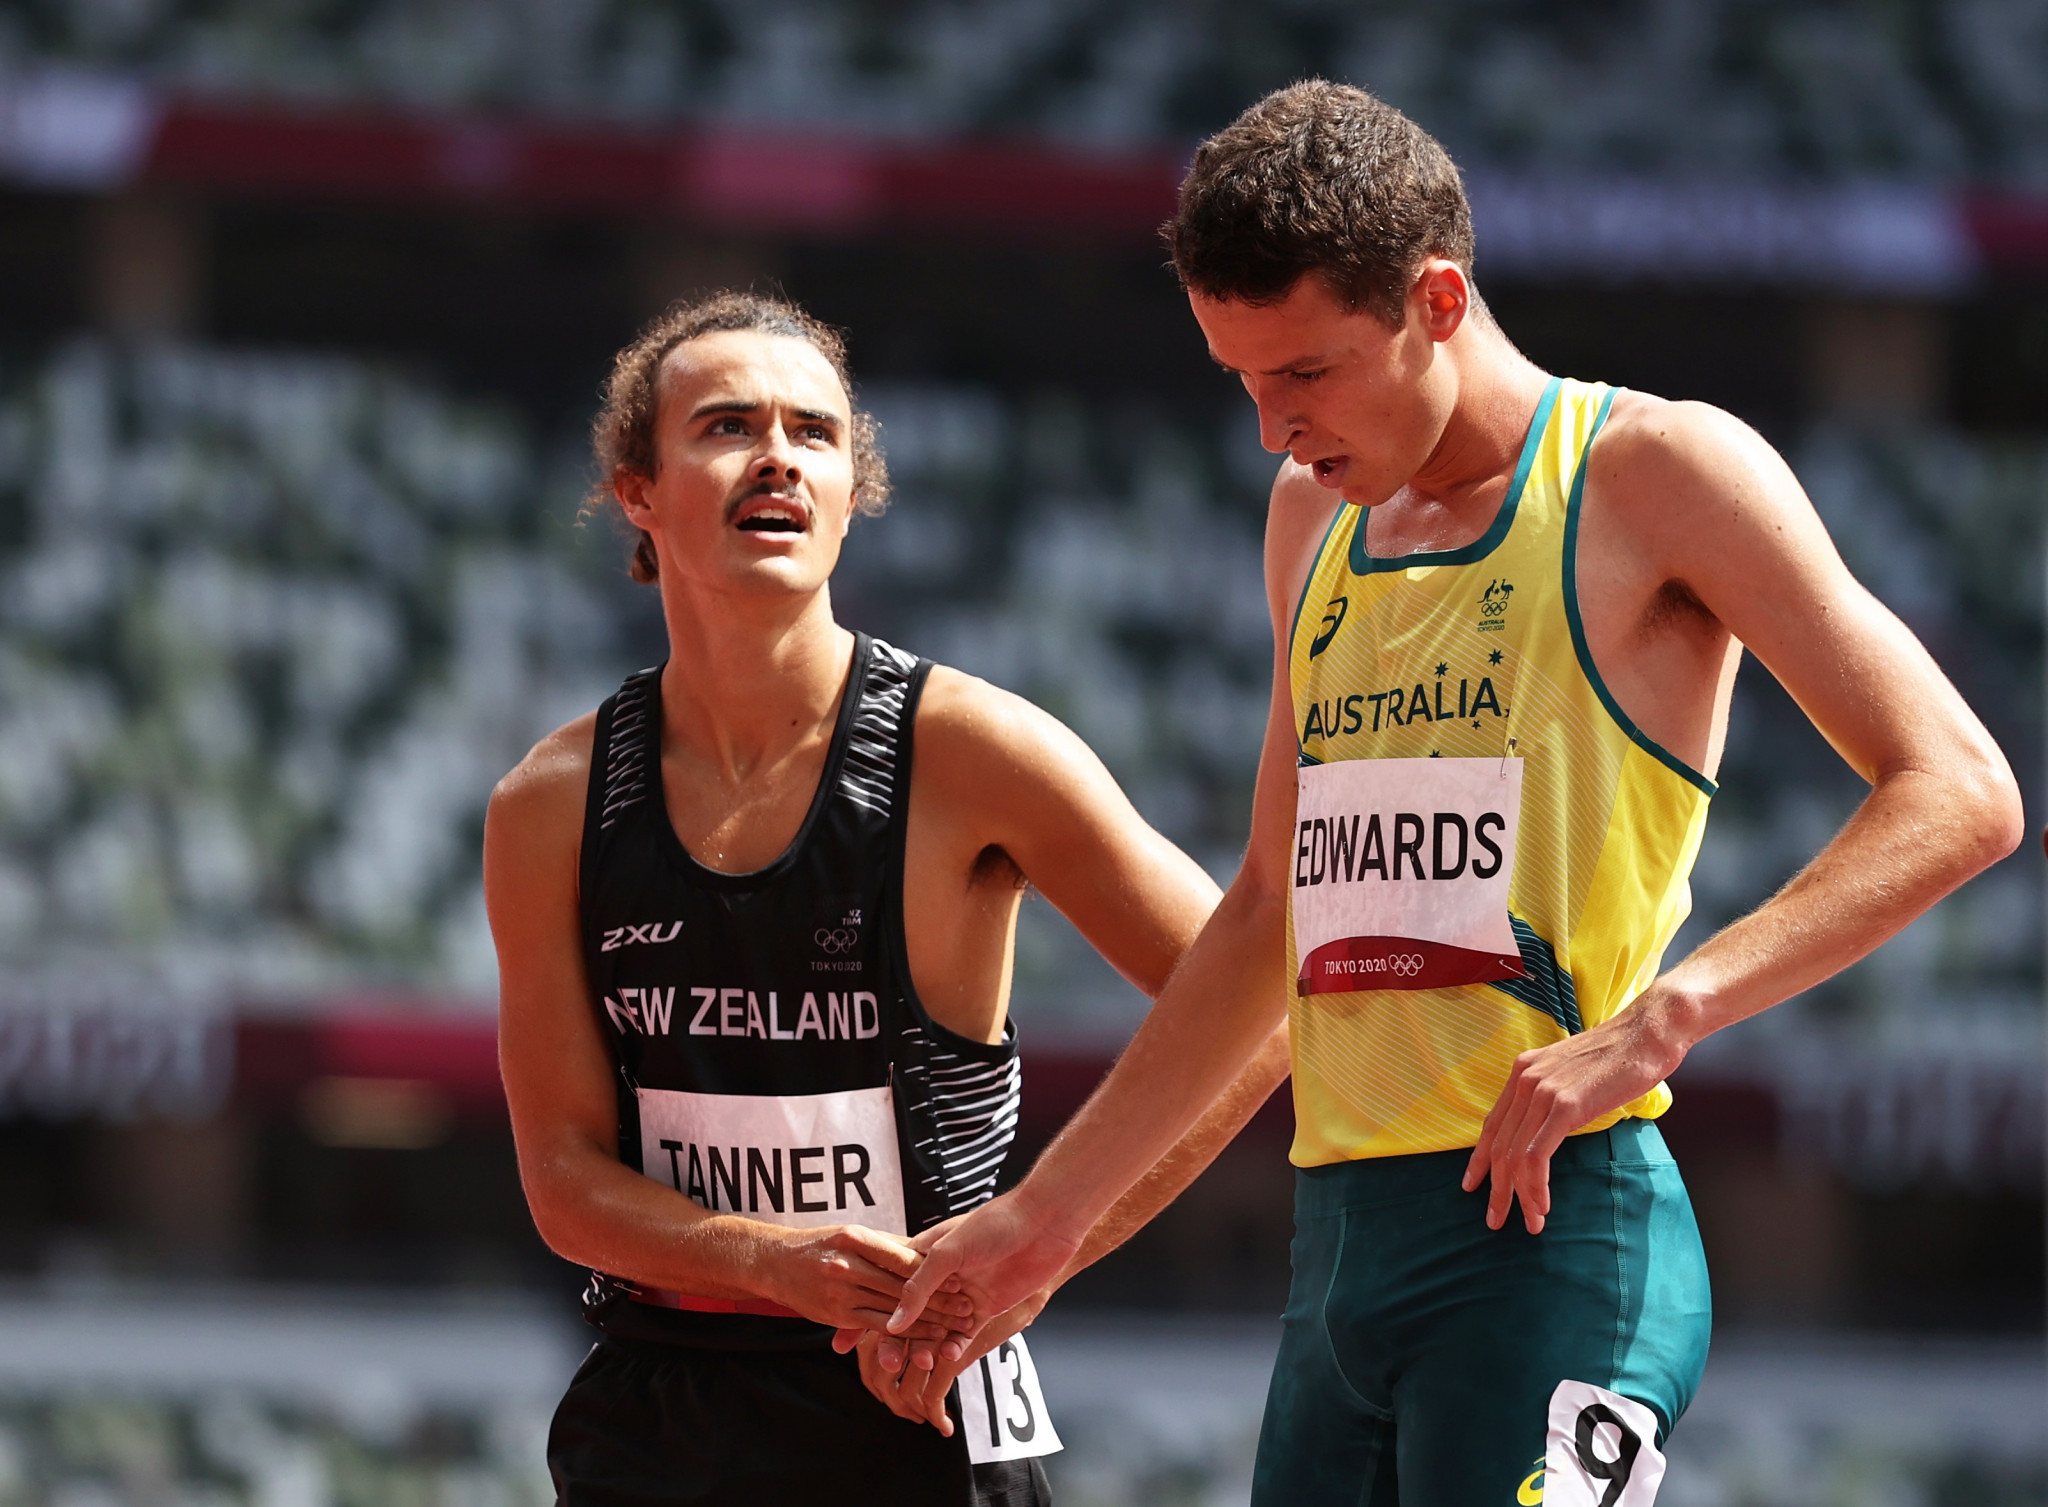 Samuel Tanner broke the championship record in men's 1500m at the Oceania Athletics Championships ©Getty Images